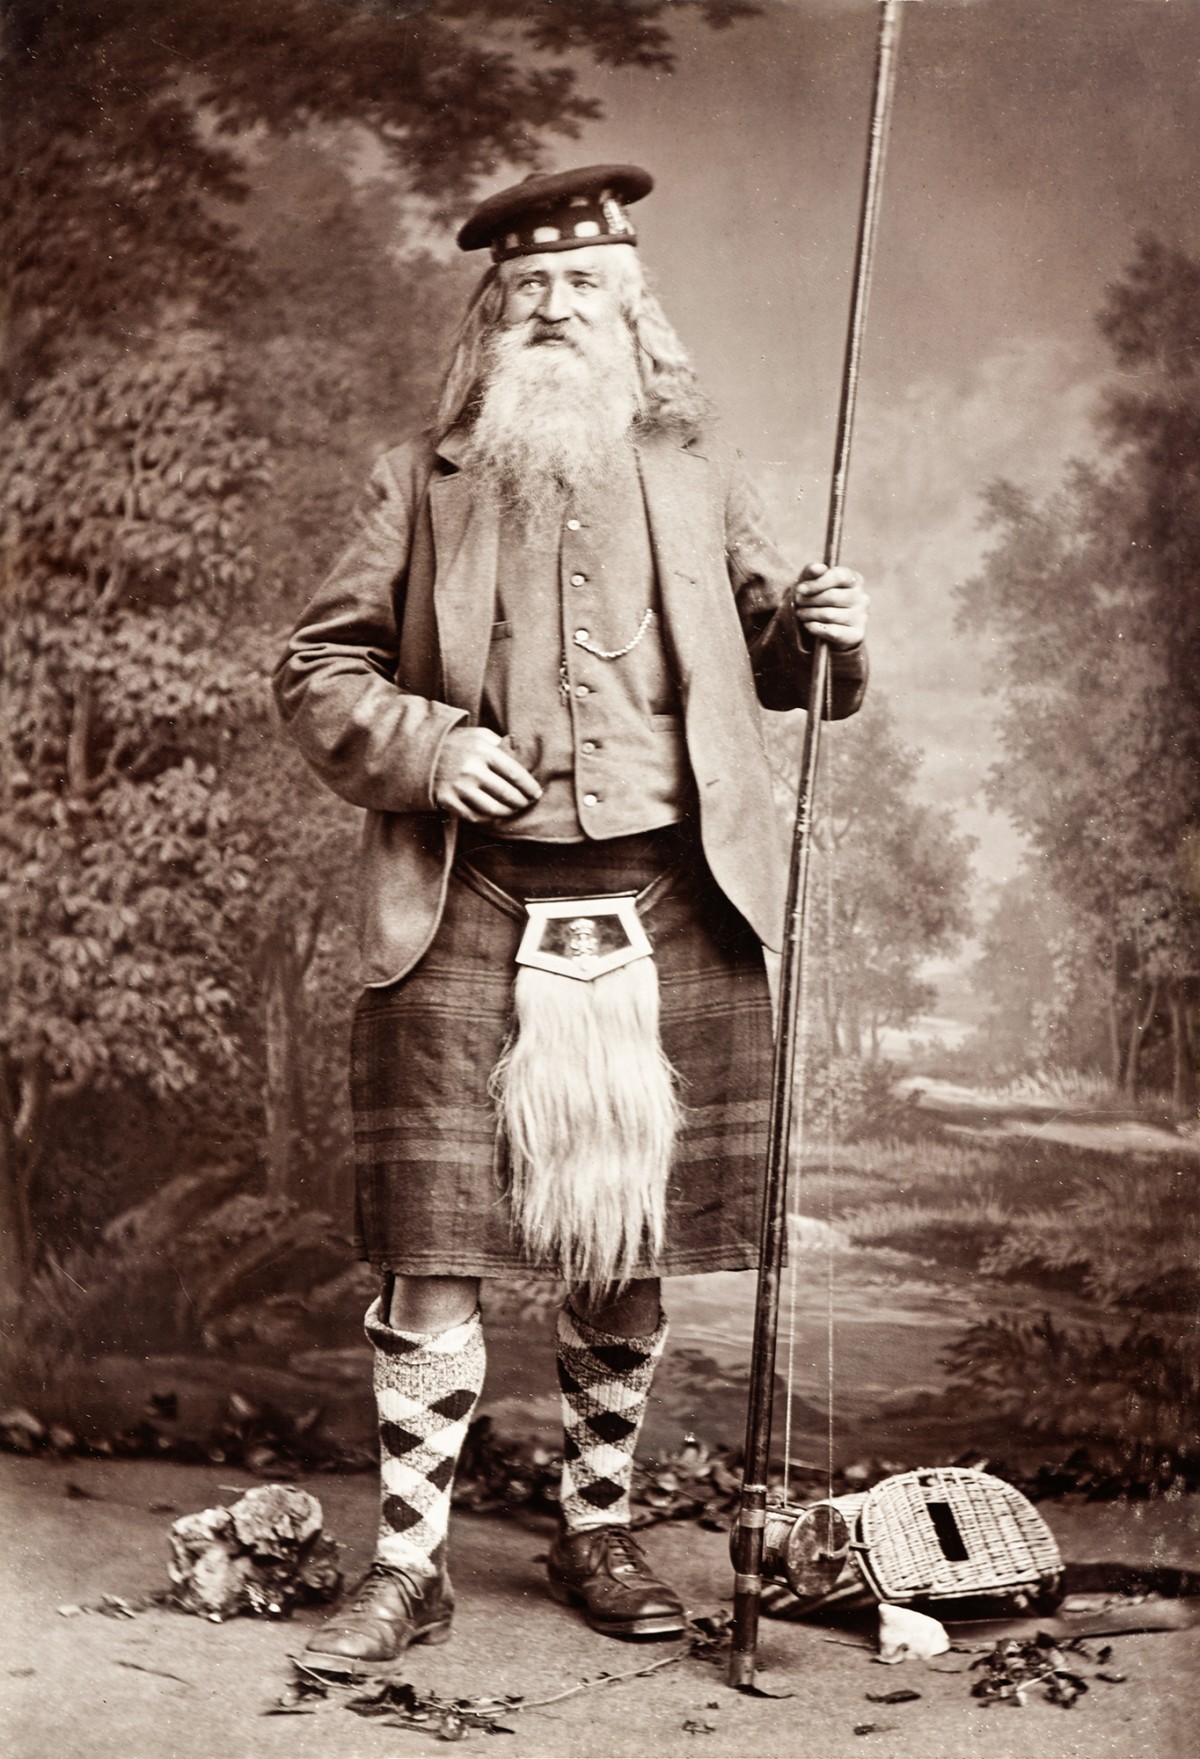 Willie Duff, ghillie, fiddler and standard bearer of the Atholl Highlanders by A.F. Mackenzie c1880s. courtesy of the collection at Blair castle